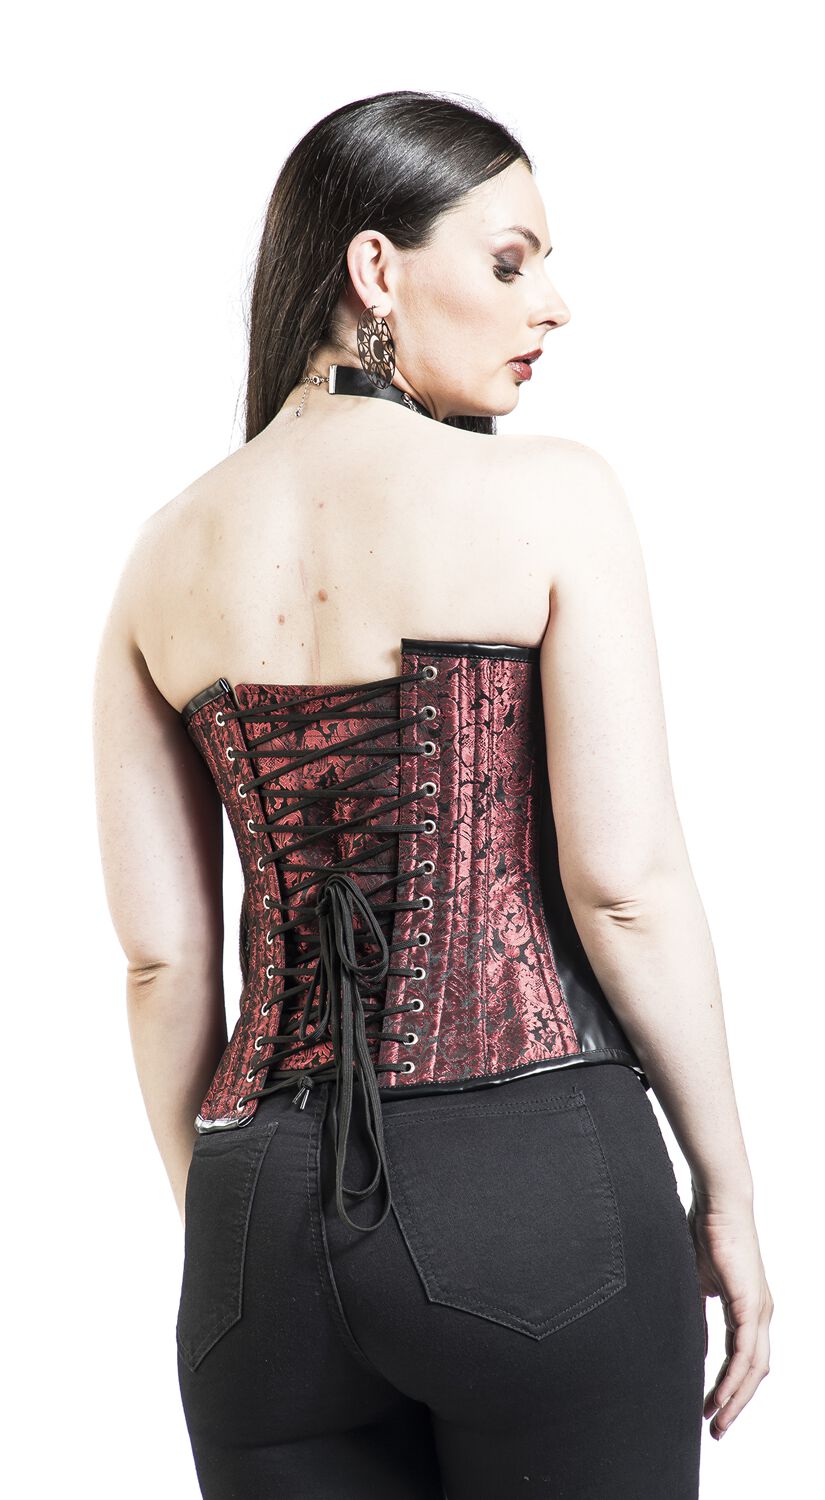 Corset 101: How to lace yourself into a corset. Step by step in